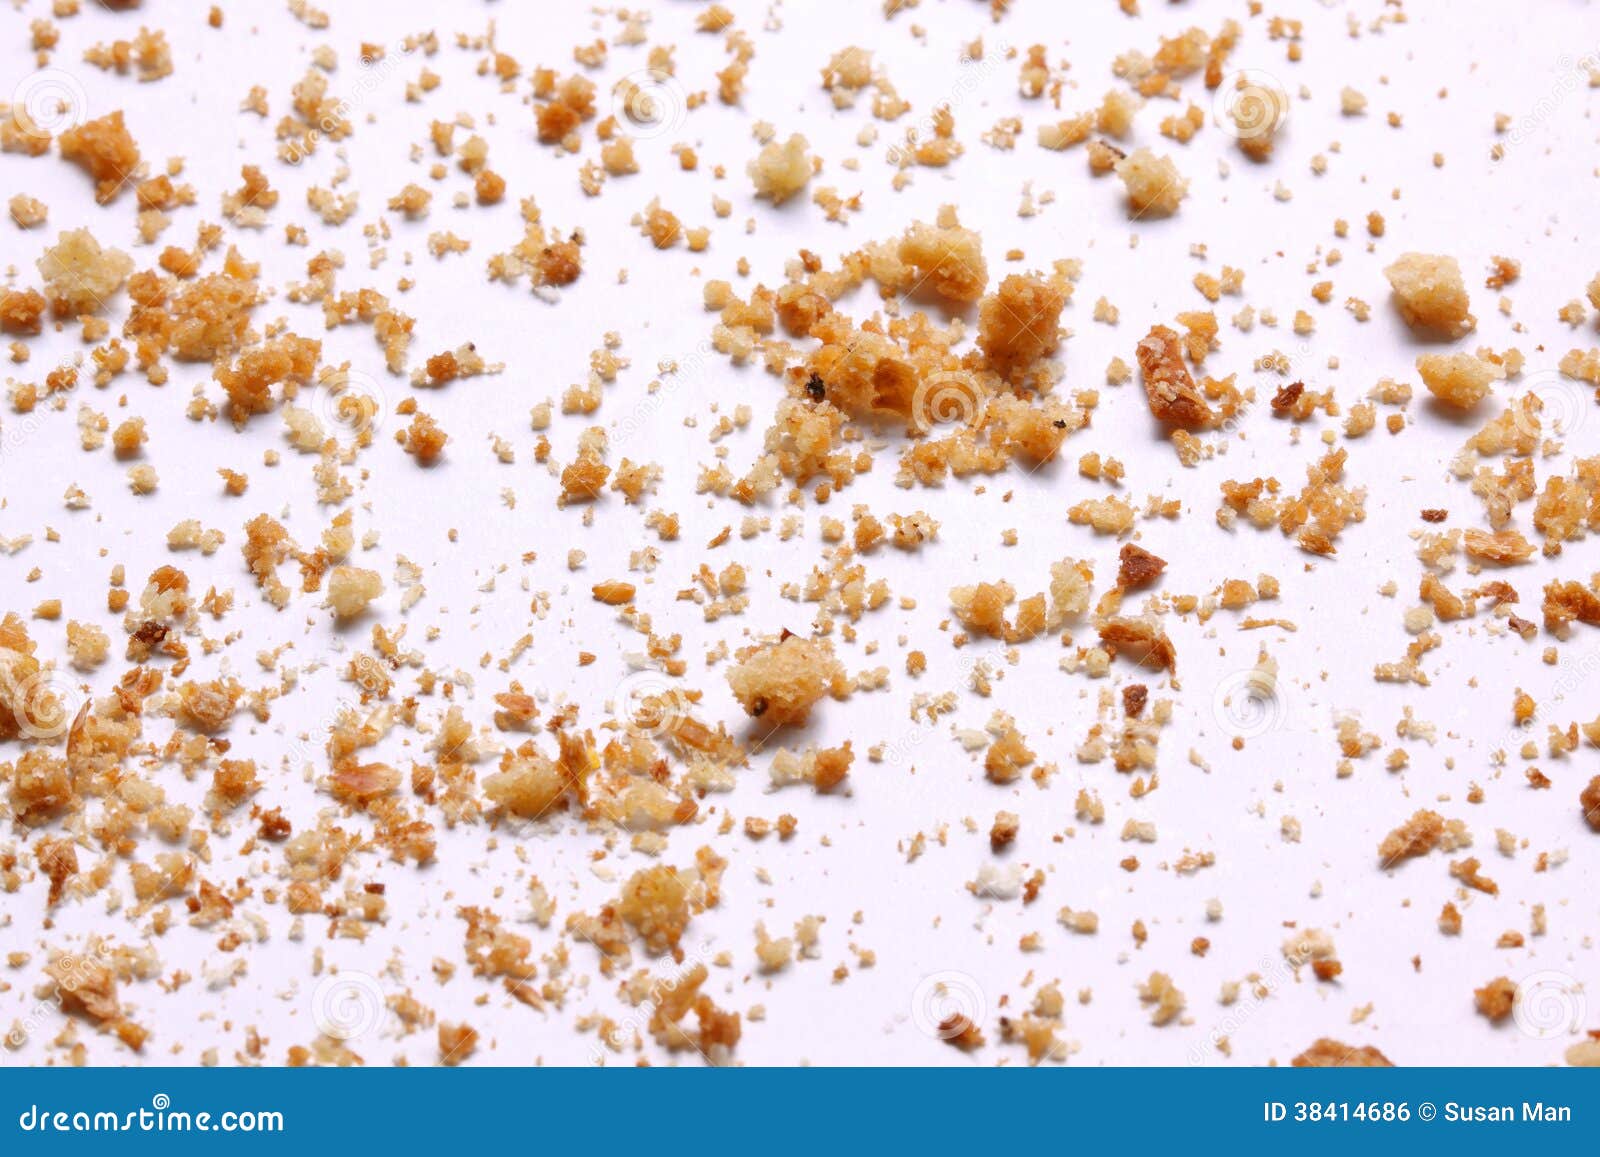 crumbs on white background close-up view